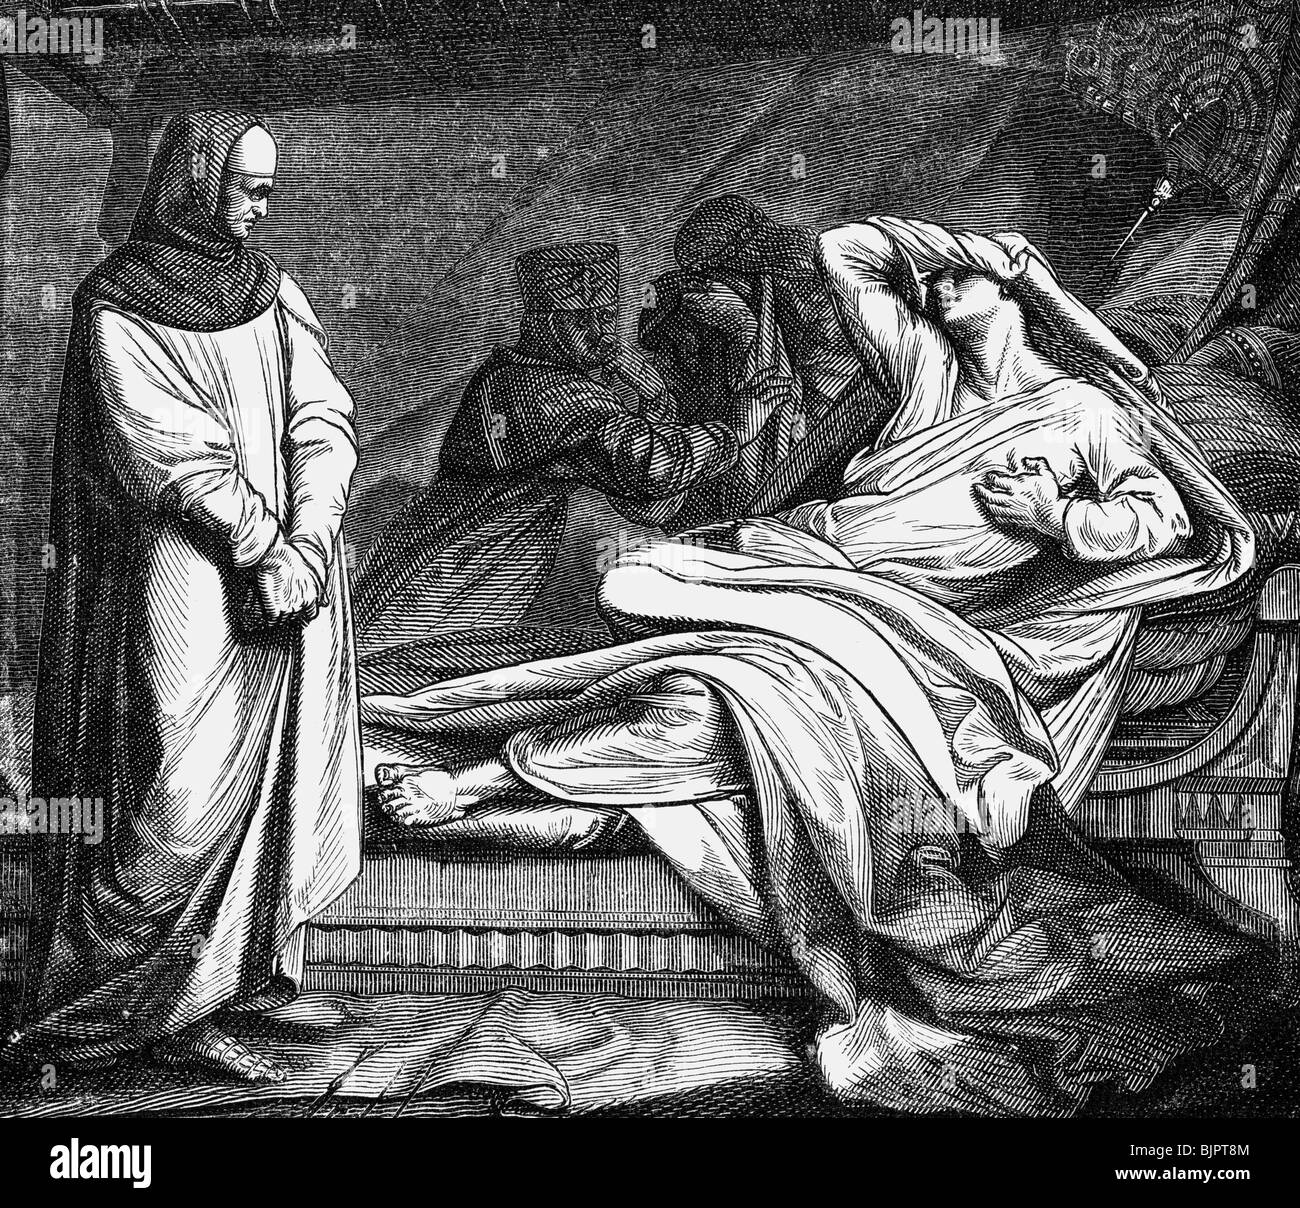 Conrad IV, 25.4.1228 - 21.5.1254, German King 13.12.1250 - 21.5.1254, while he is moaning about the misery of his family, wood engraving, 19th century, , Stock Photo